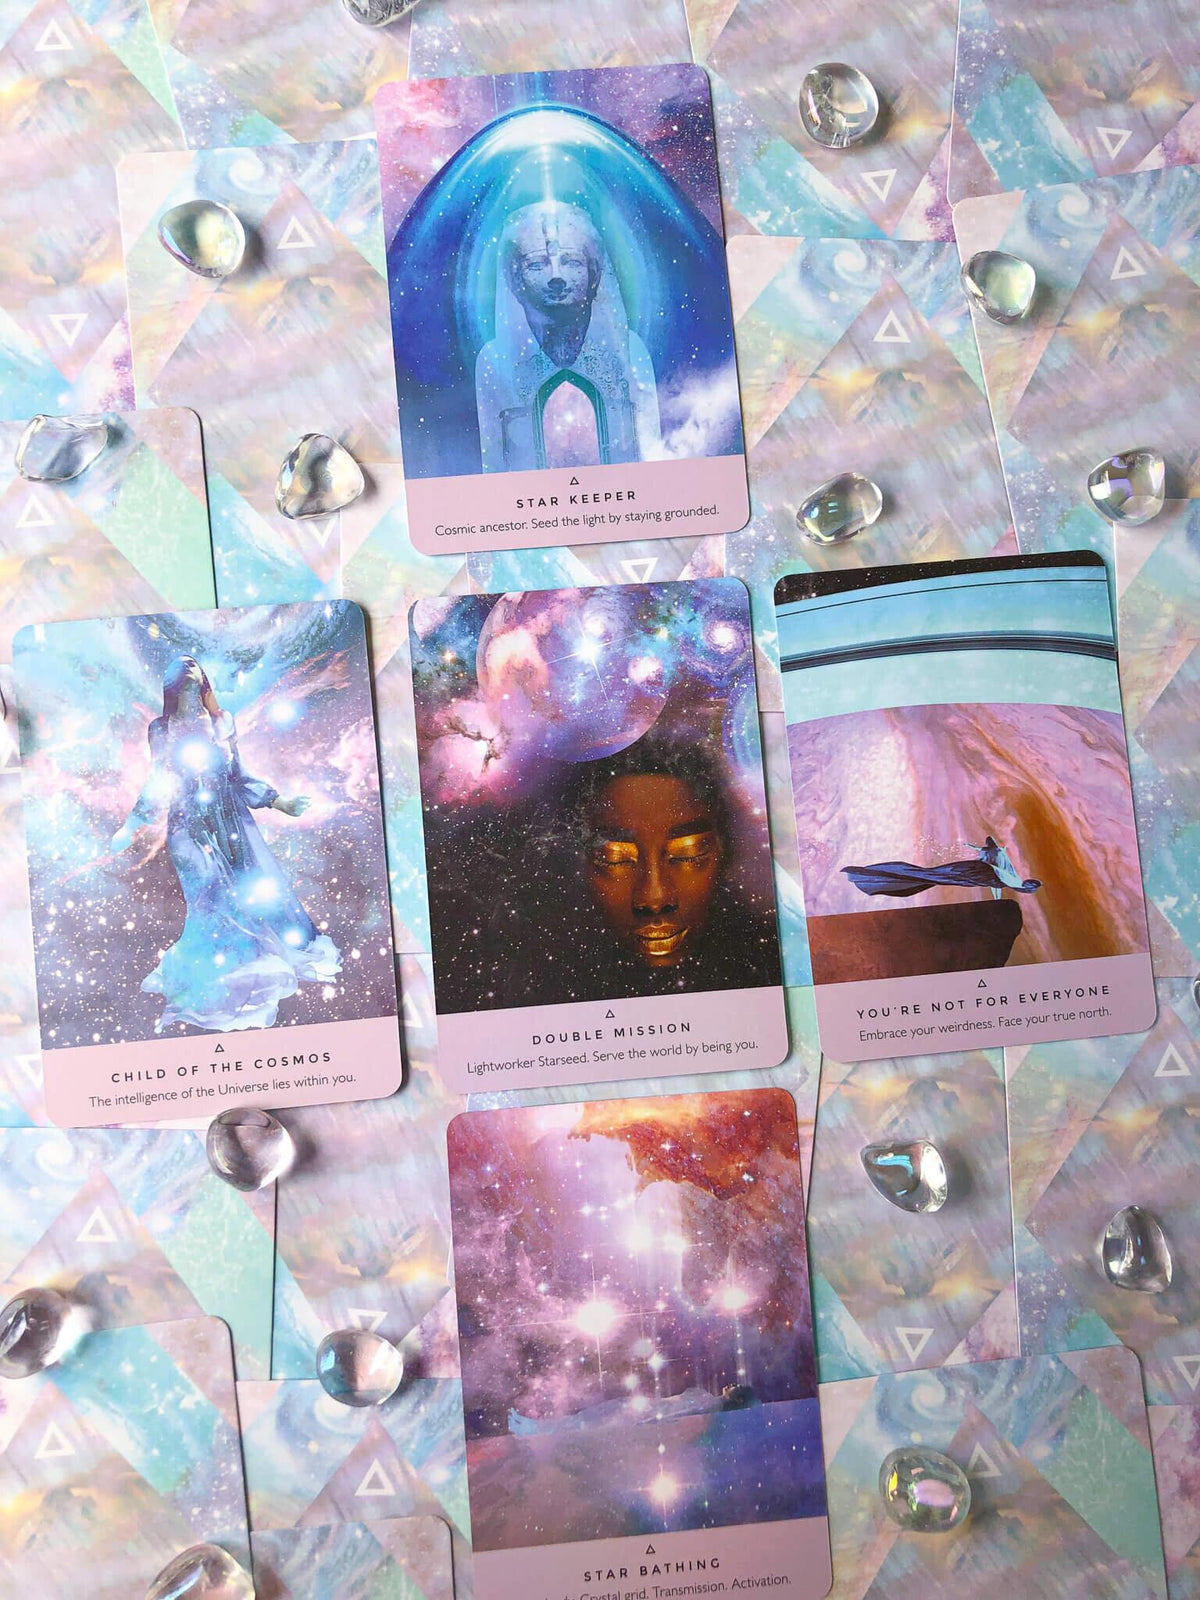 The Starseed Oracle Card Deck